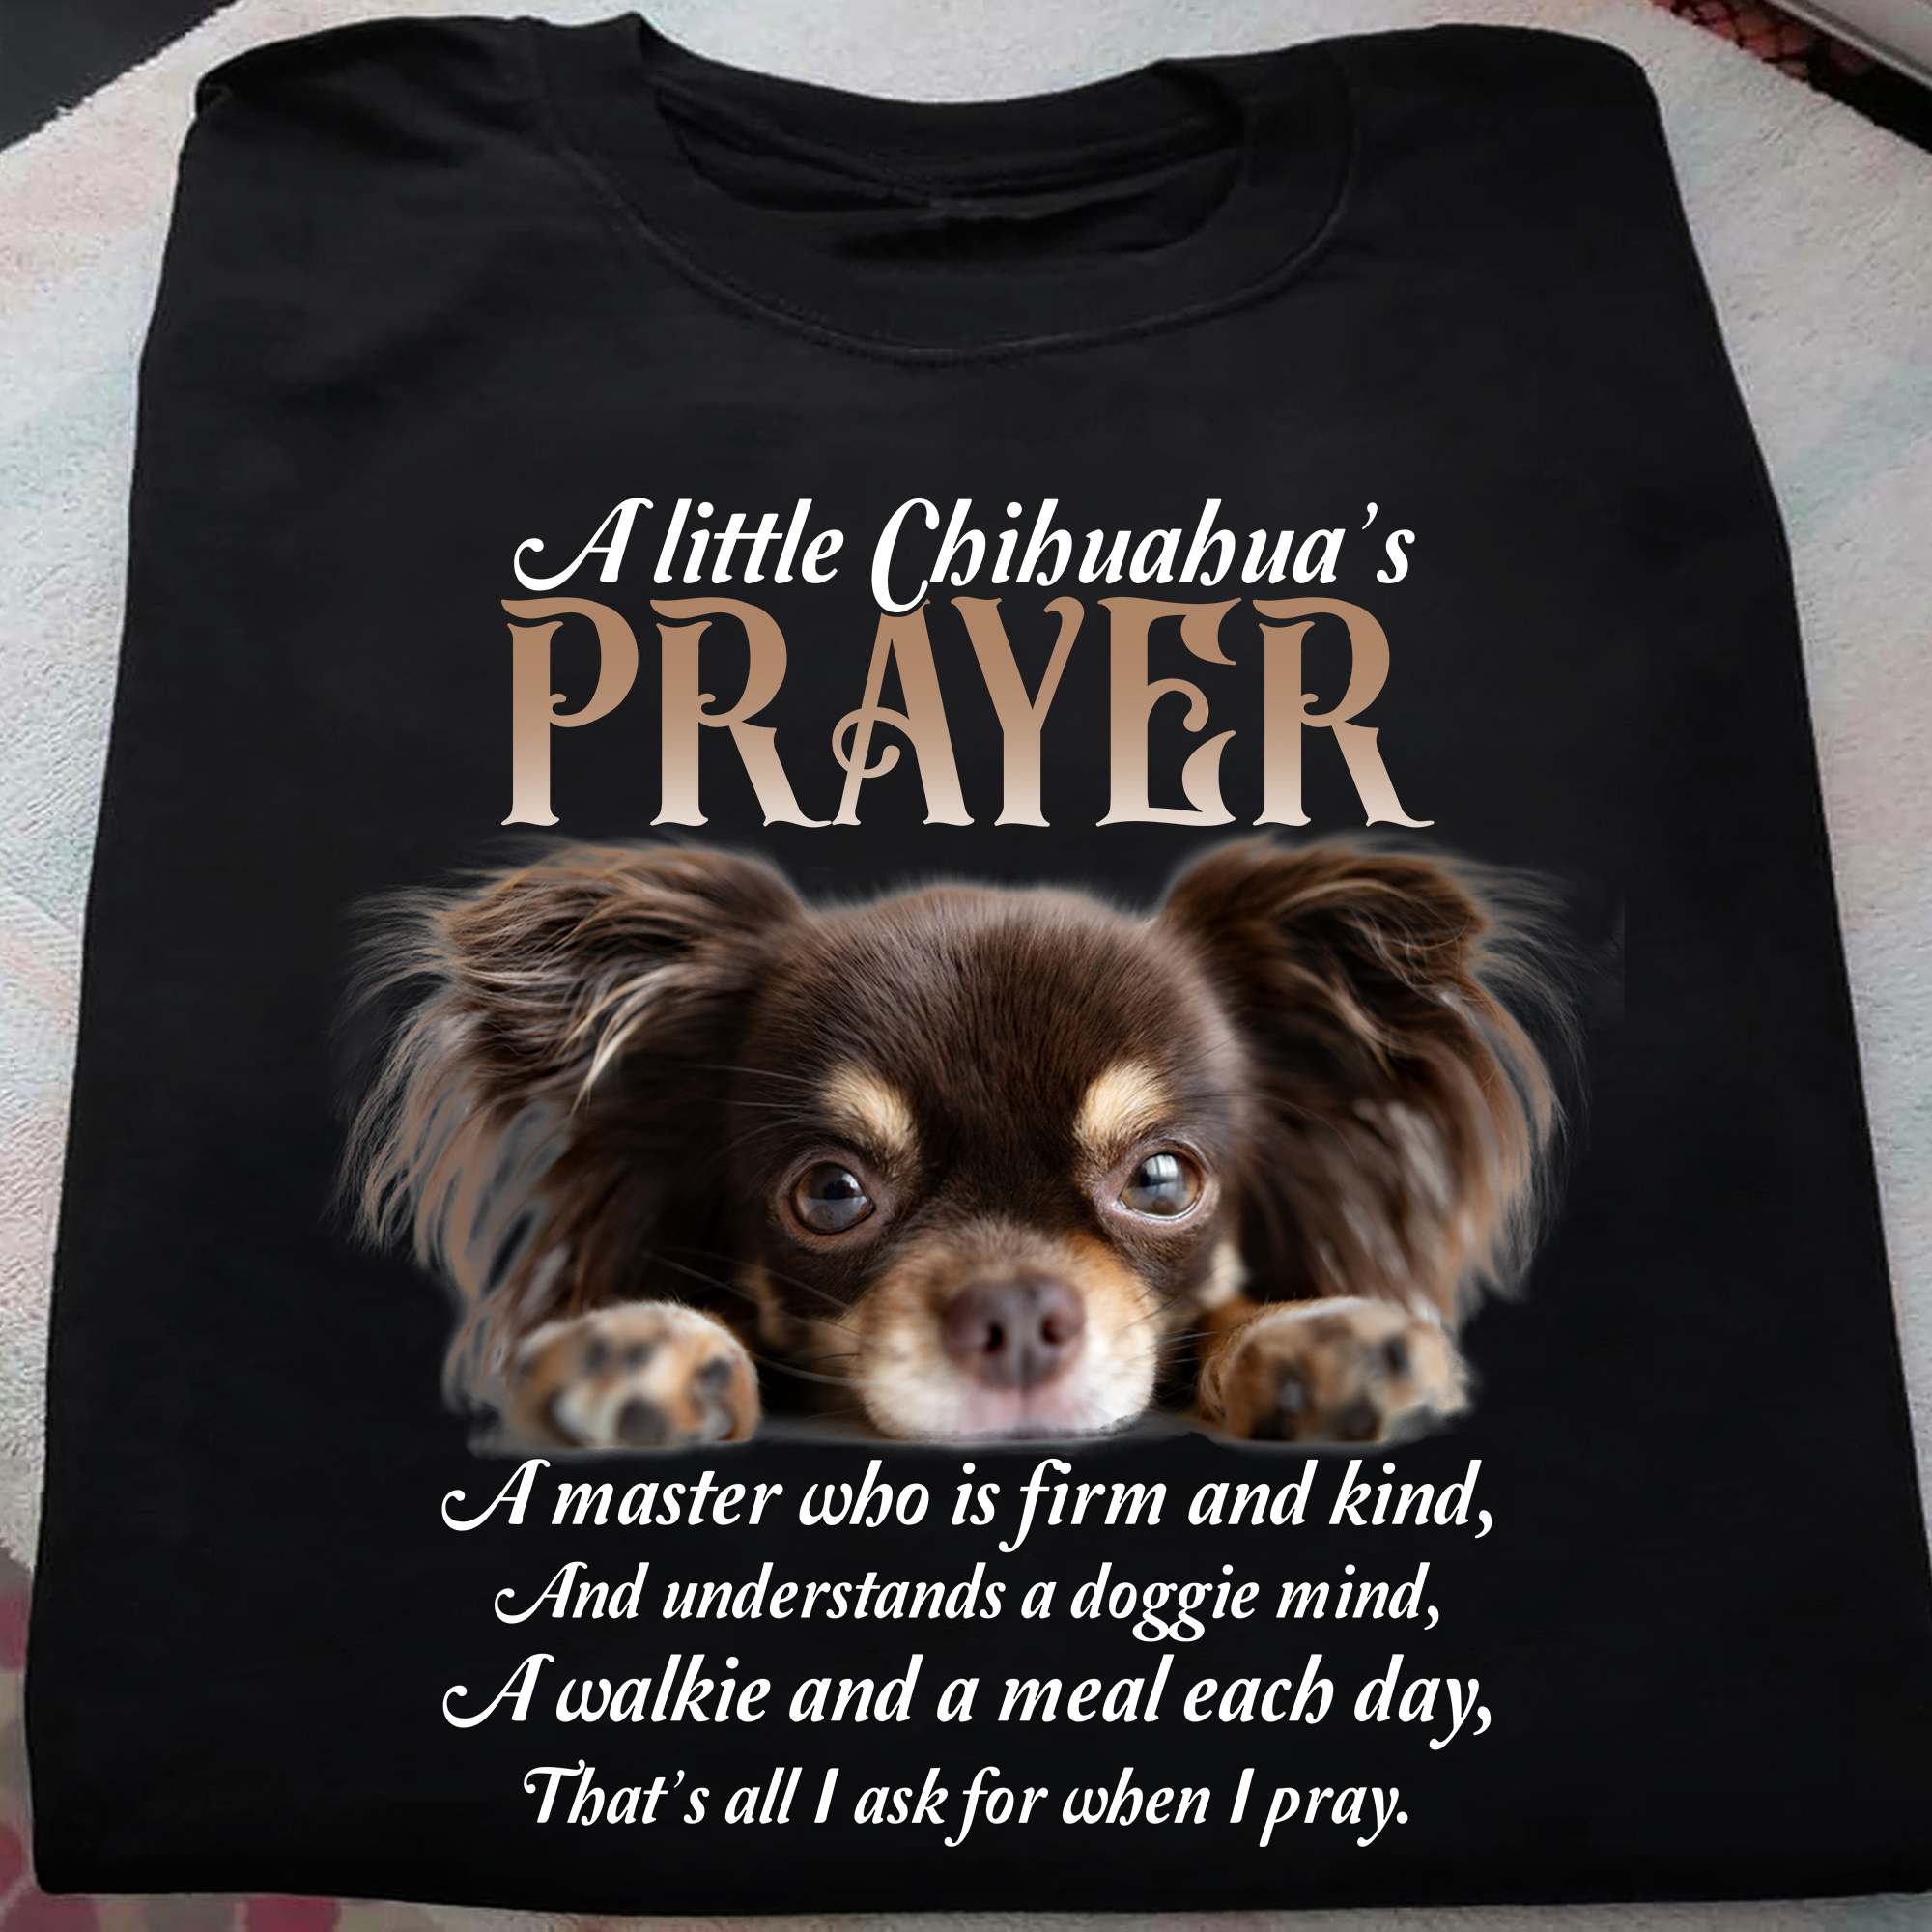 A little Chihuahua's prayer - A master who is firm and kind, understands a doggie mind